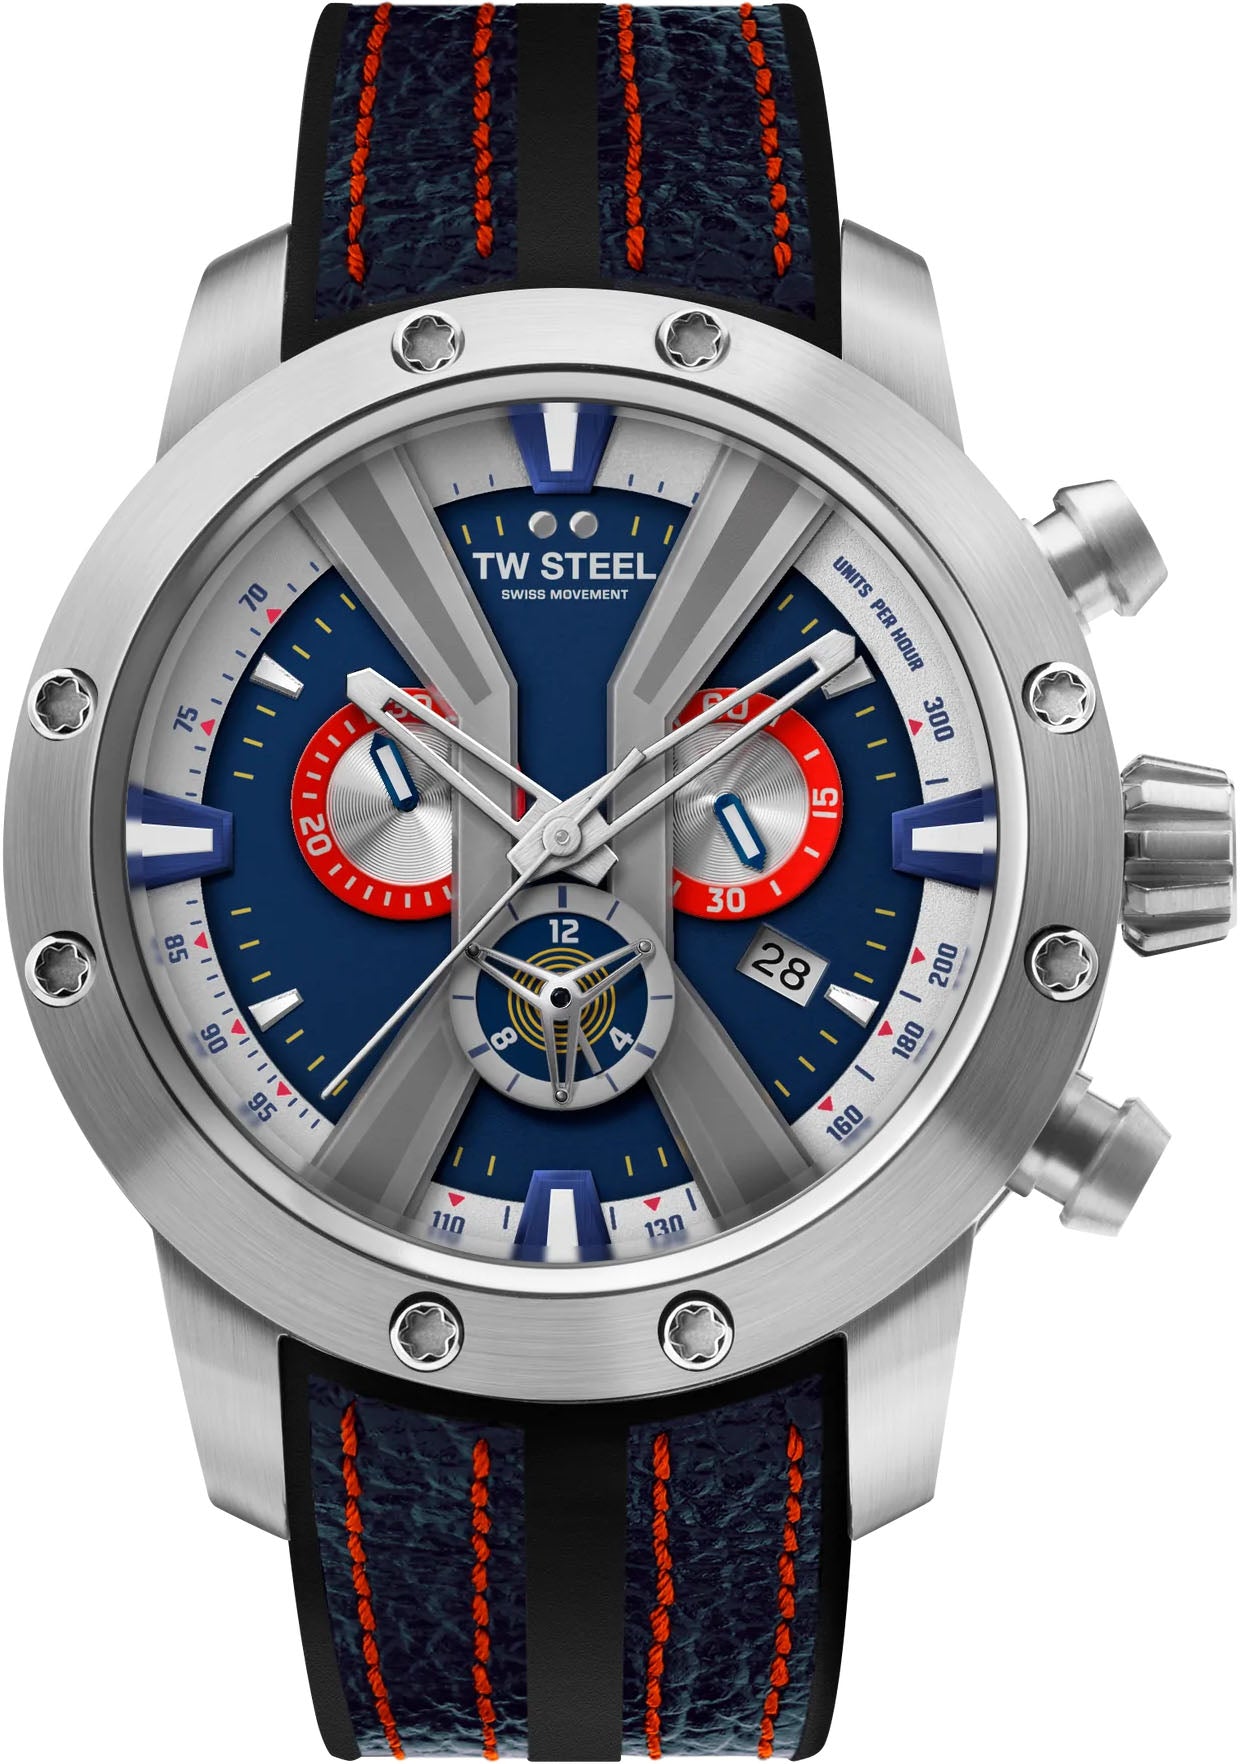 Photos - Wrist Watch TW Steel Watch Grand Tech Red Bull Ampol Racing Limited Edition - Blue TW 